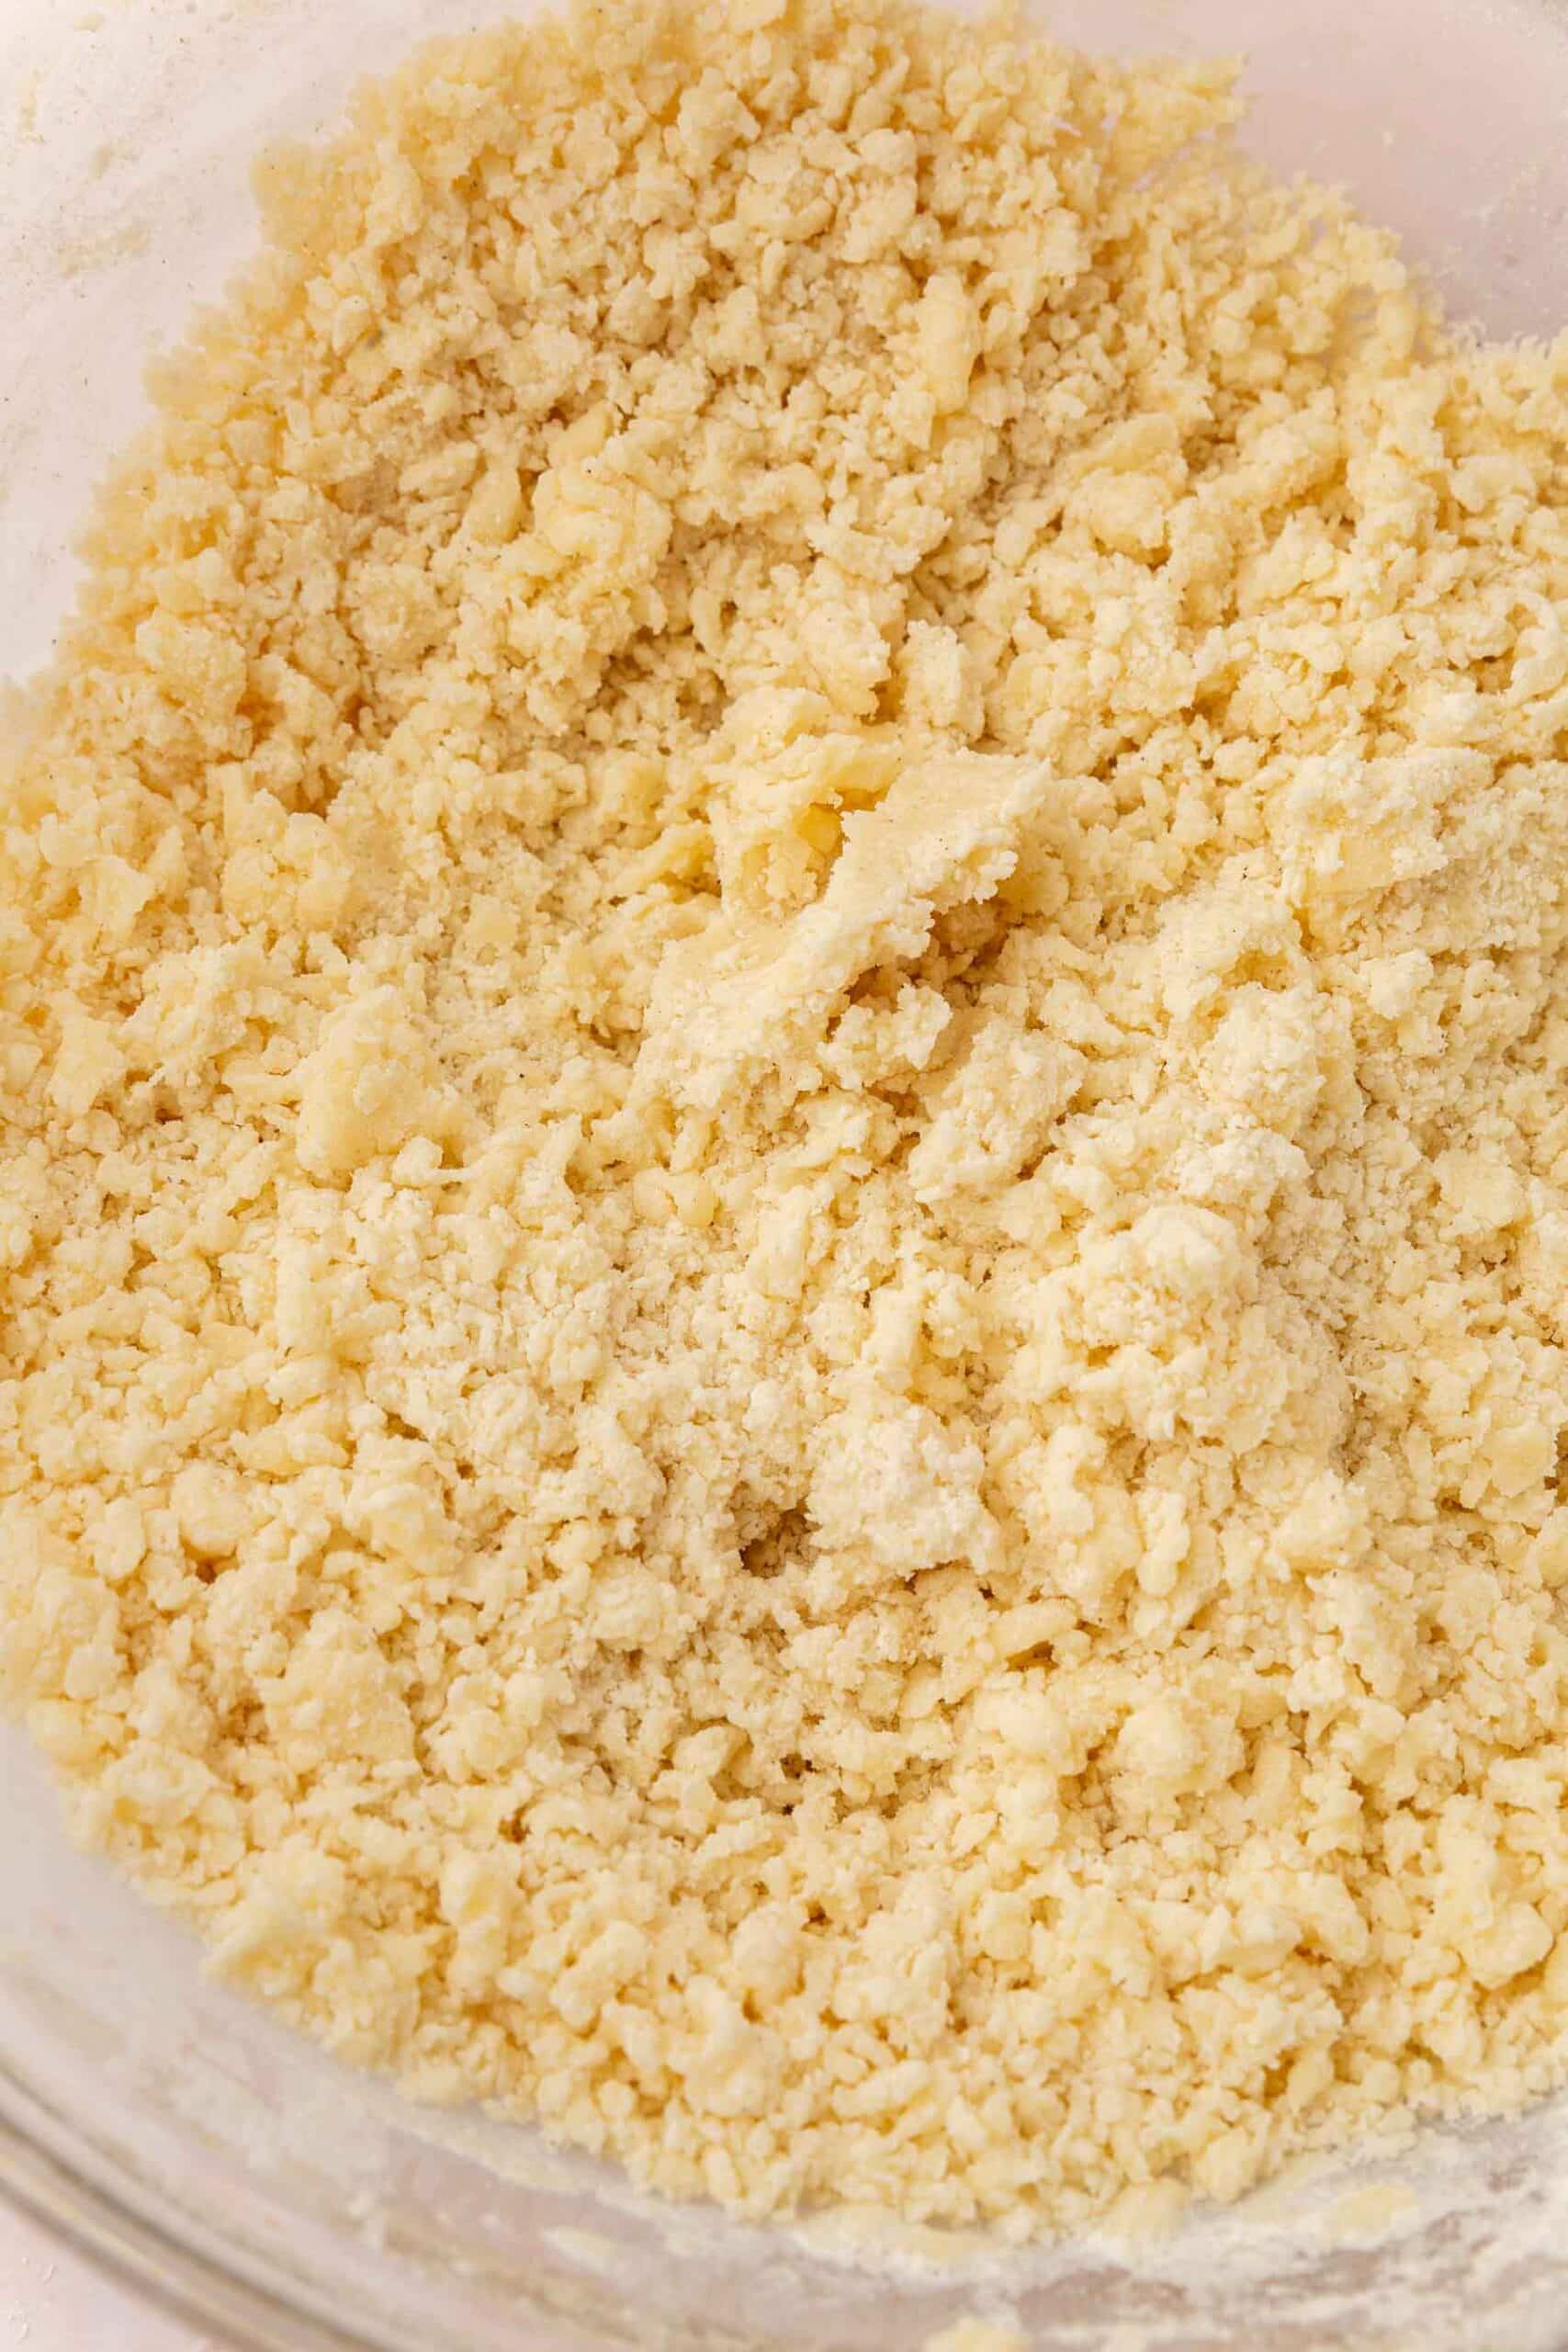 A close up of crumbly gluten-free shortbread dough in a glass mixing bowl.